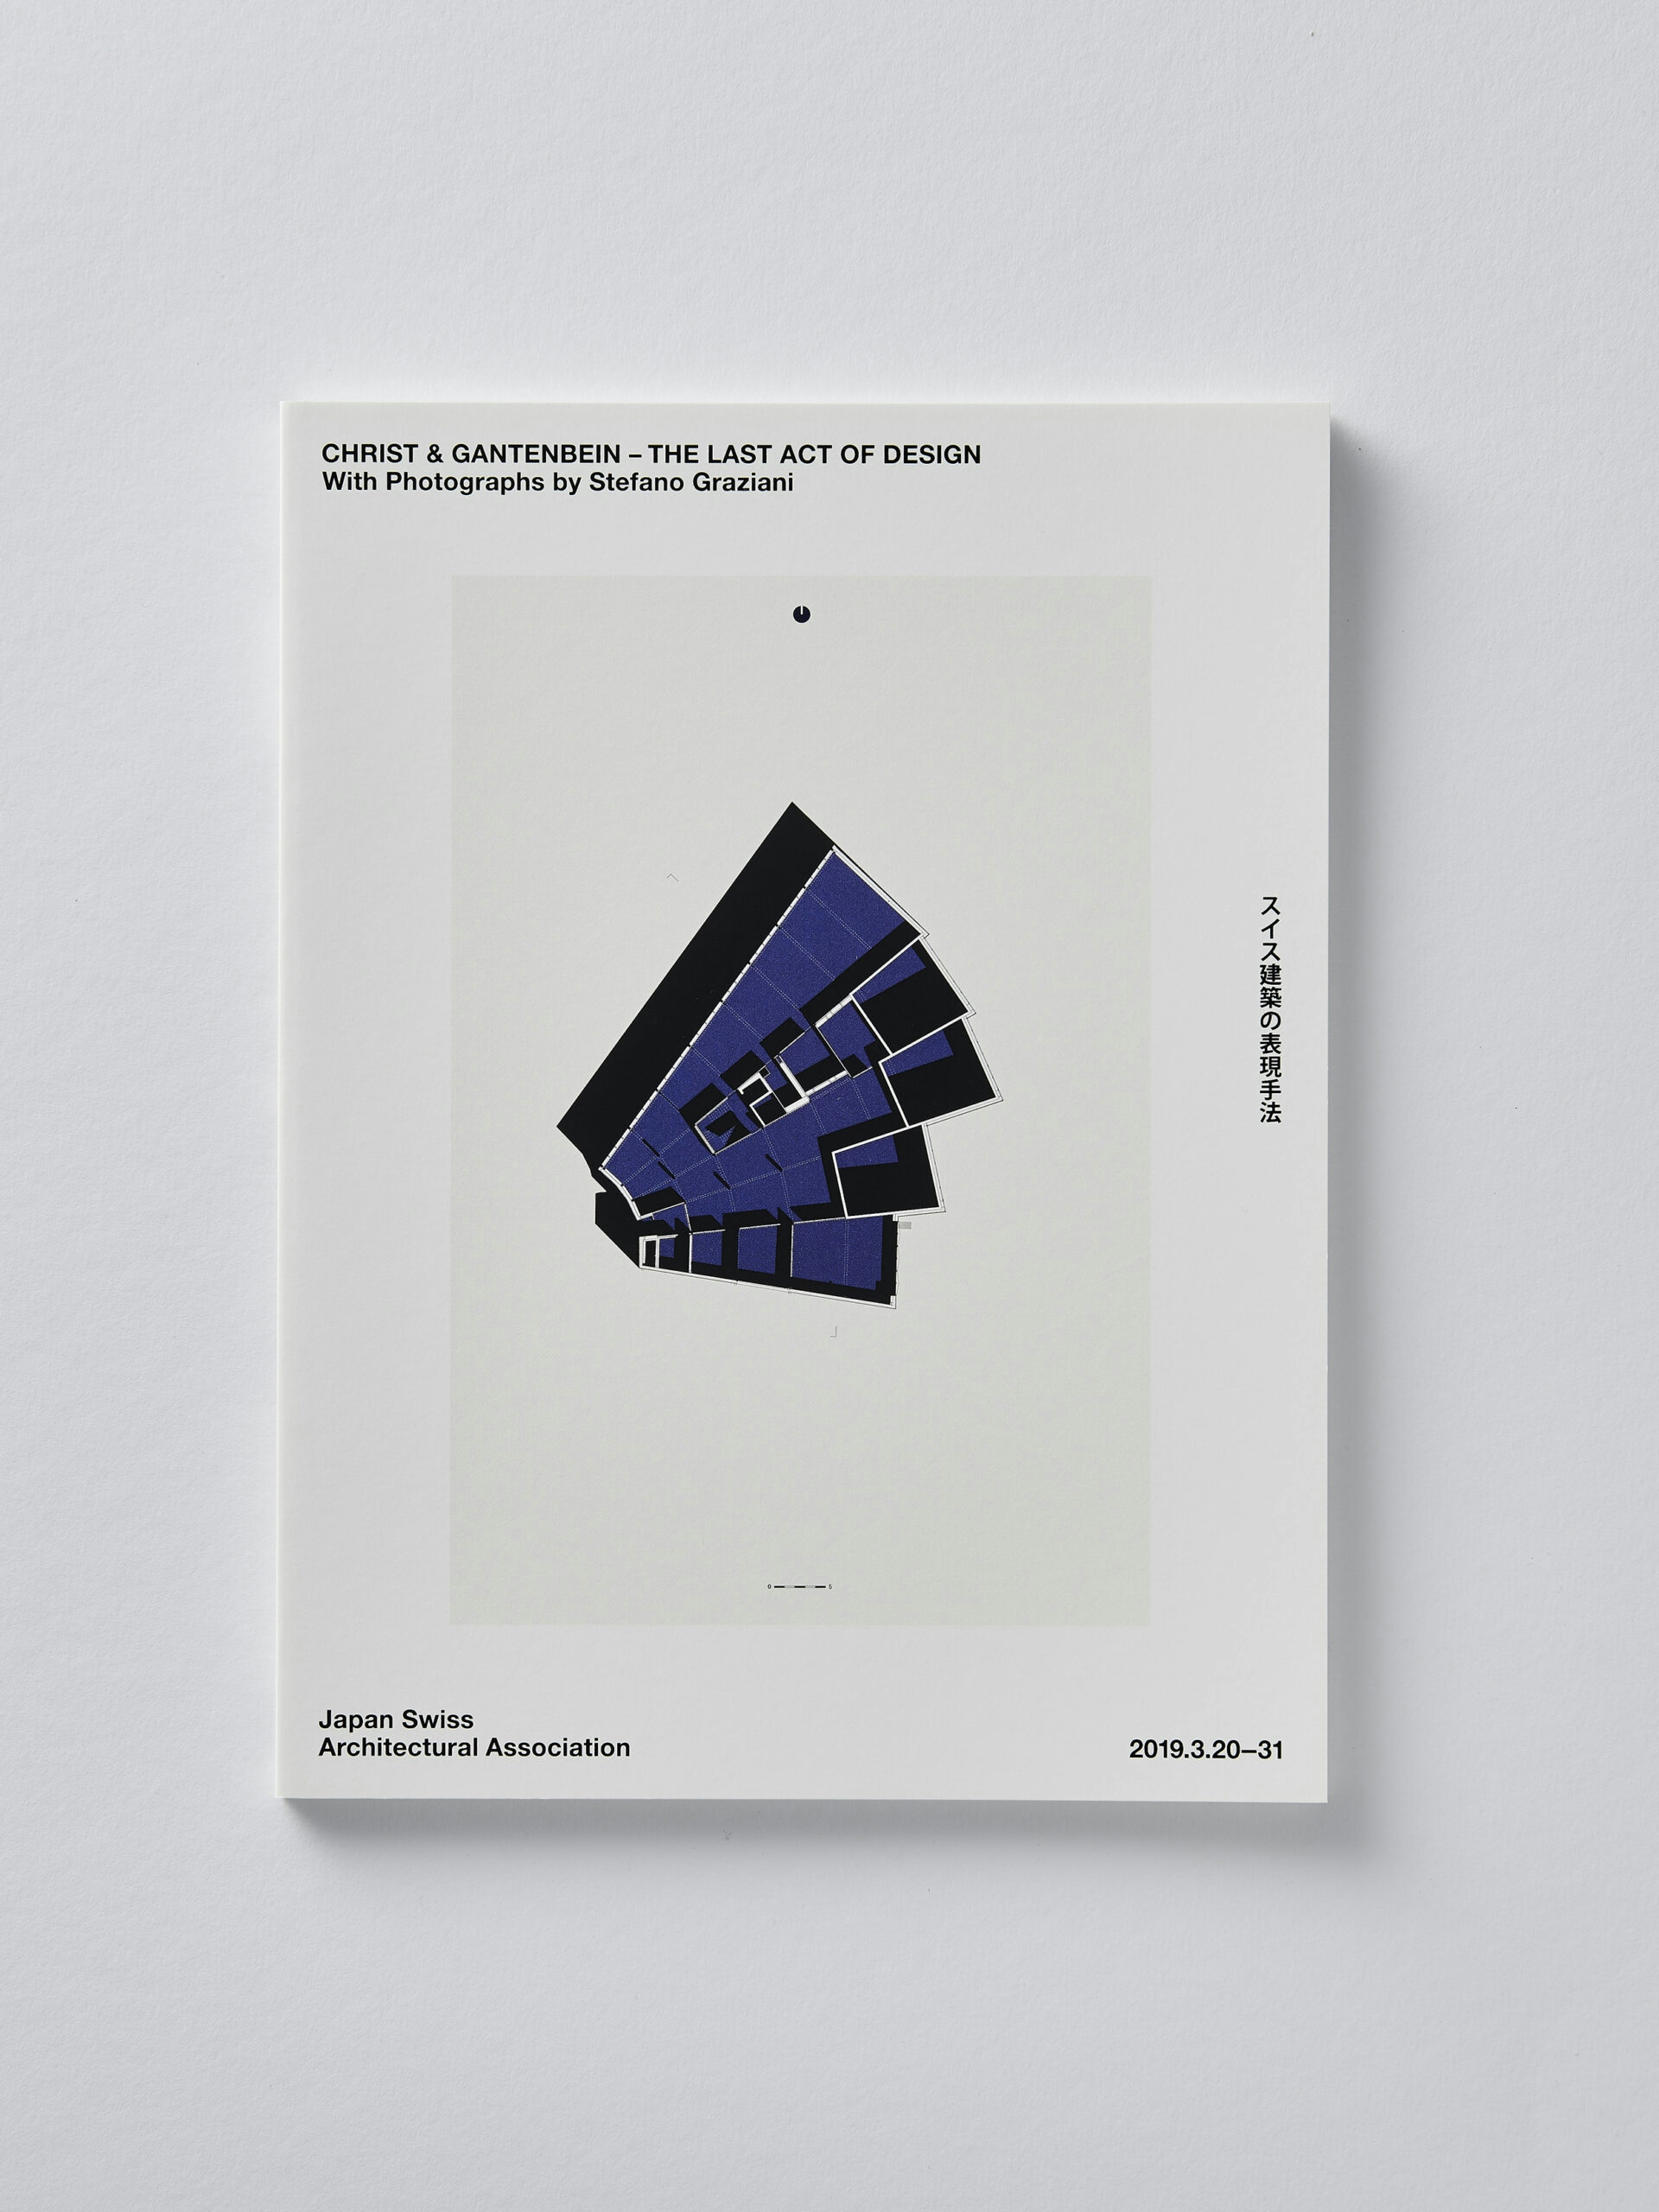 Christ & Gantenbein – The Last Act of Design booklet front cover